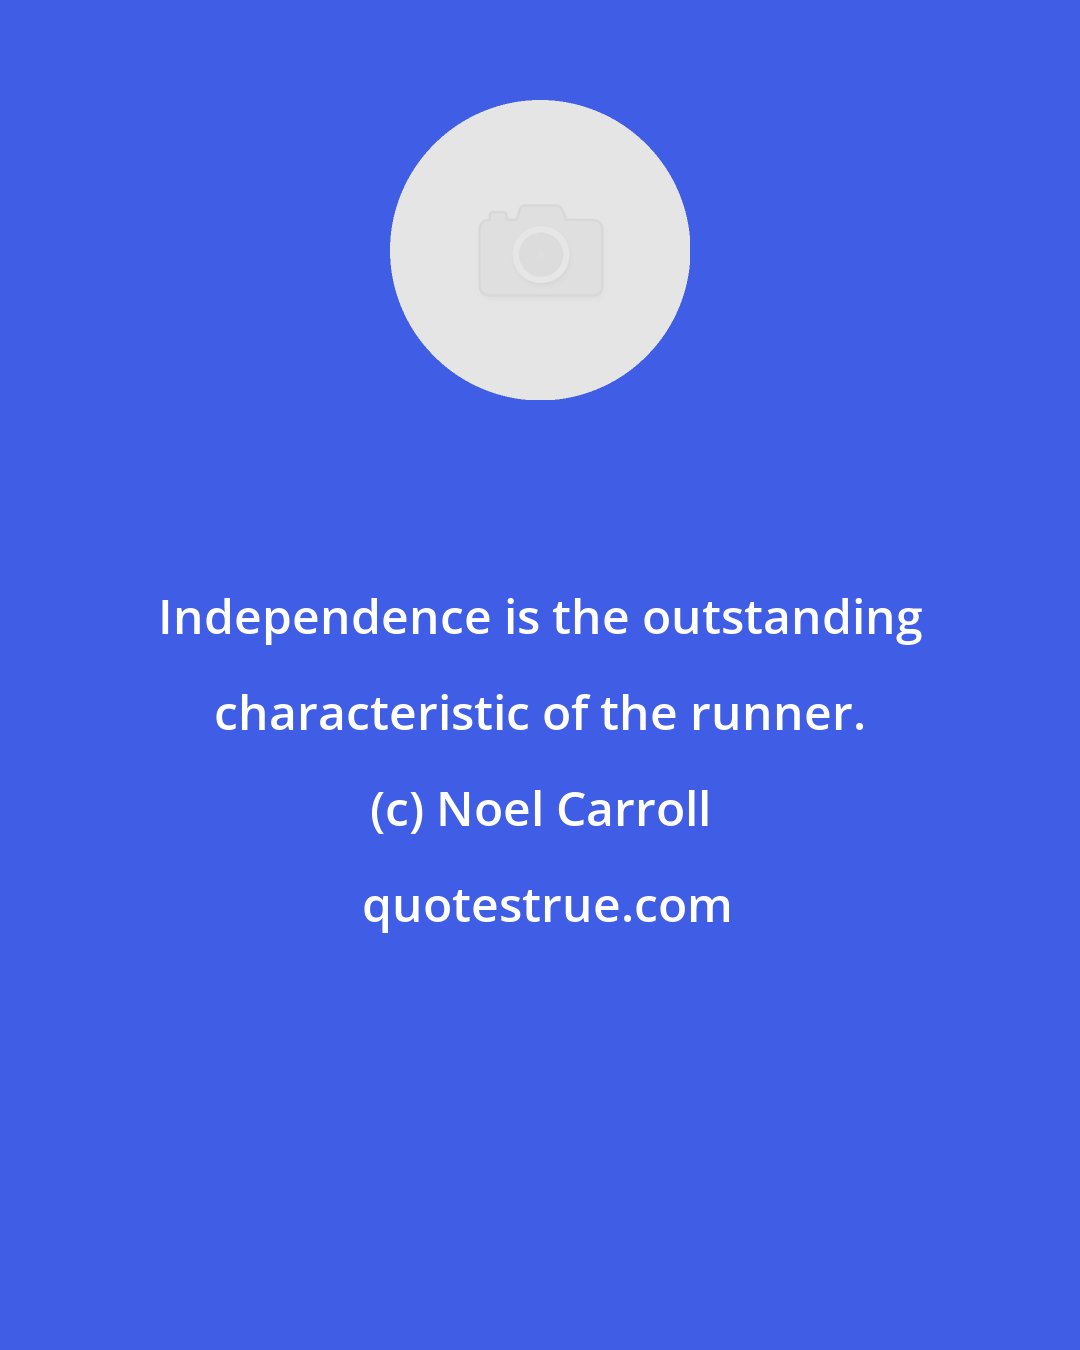 Noel Carroll: Independence is the outstanding characteristic of the runner.